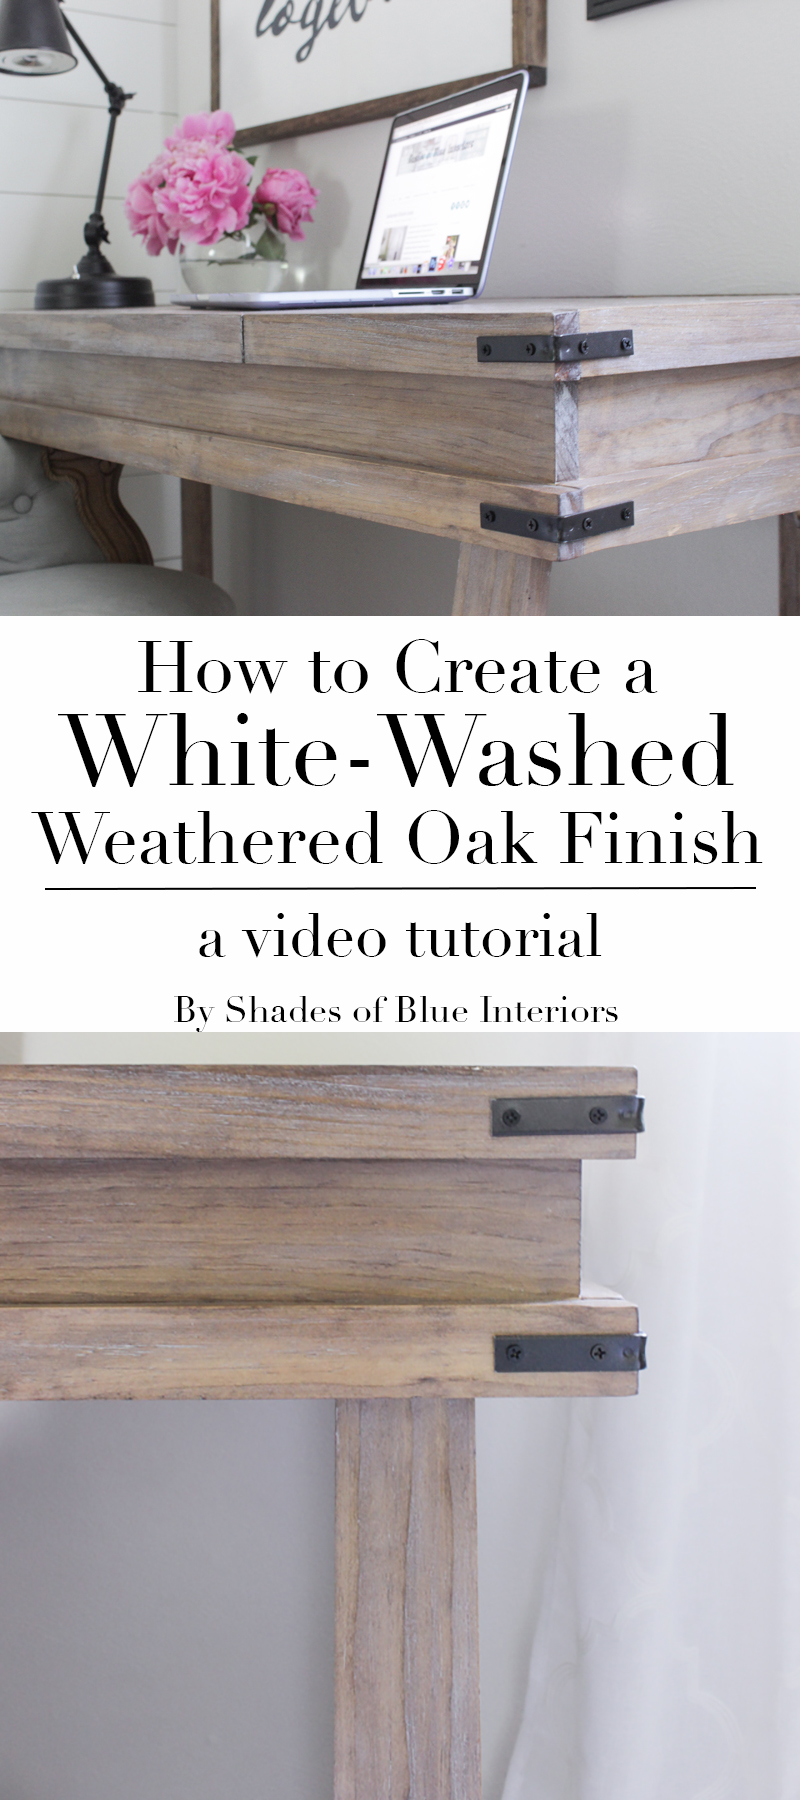 How-to-Create-a-White-Washed-Weathered-Oak-Finish